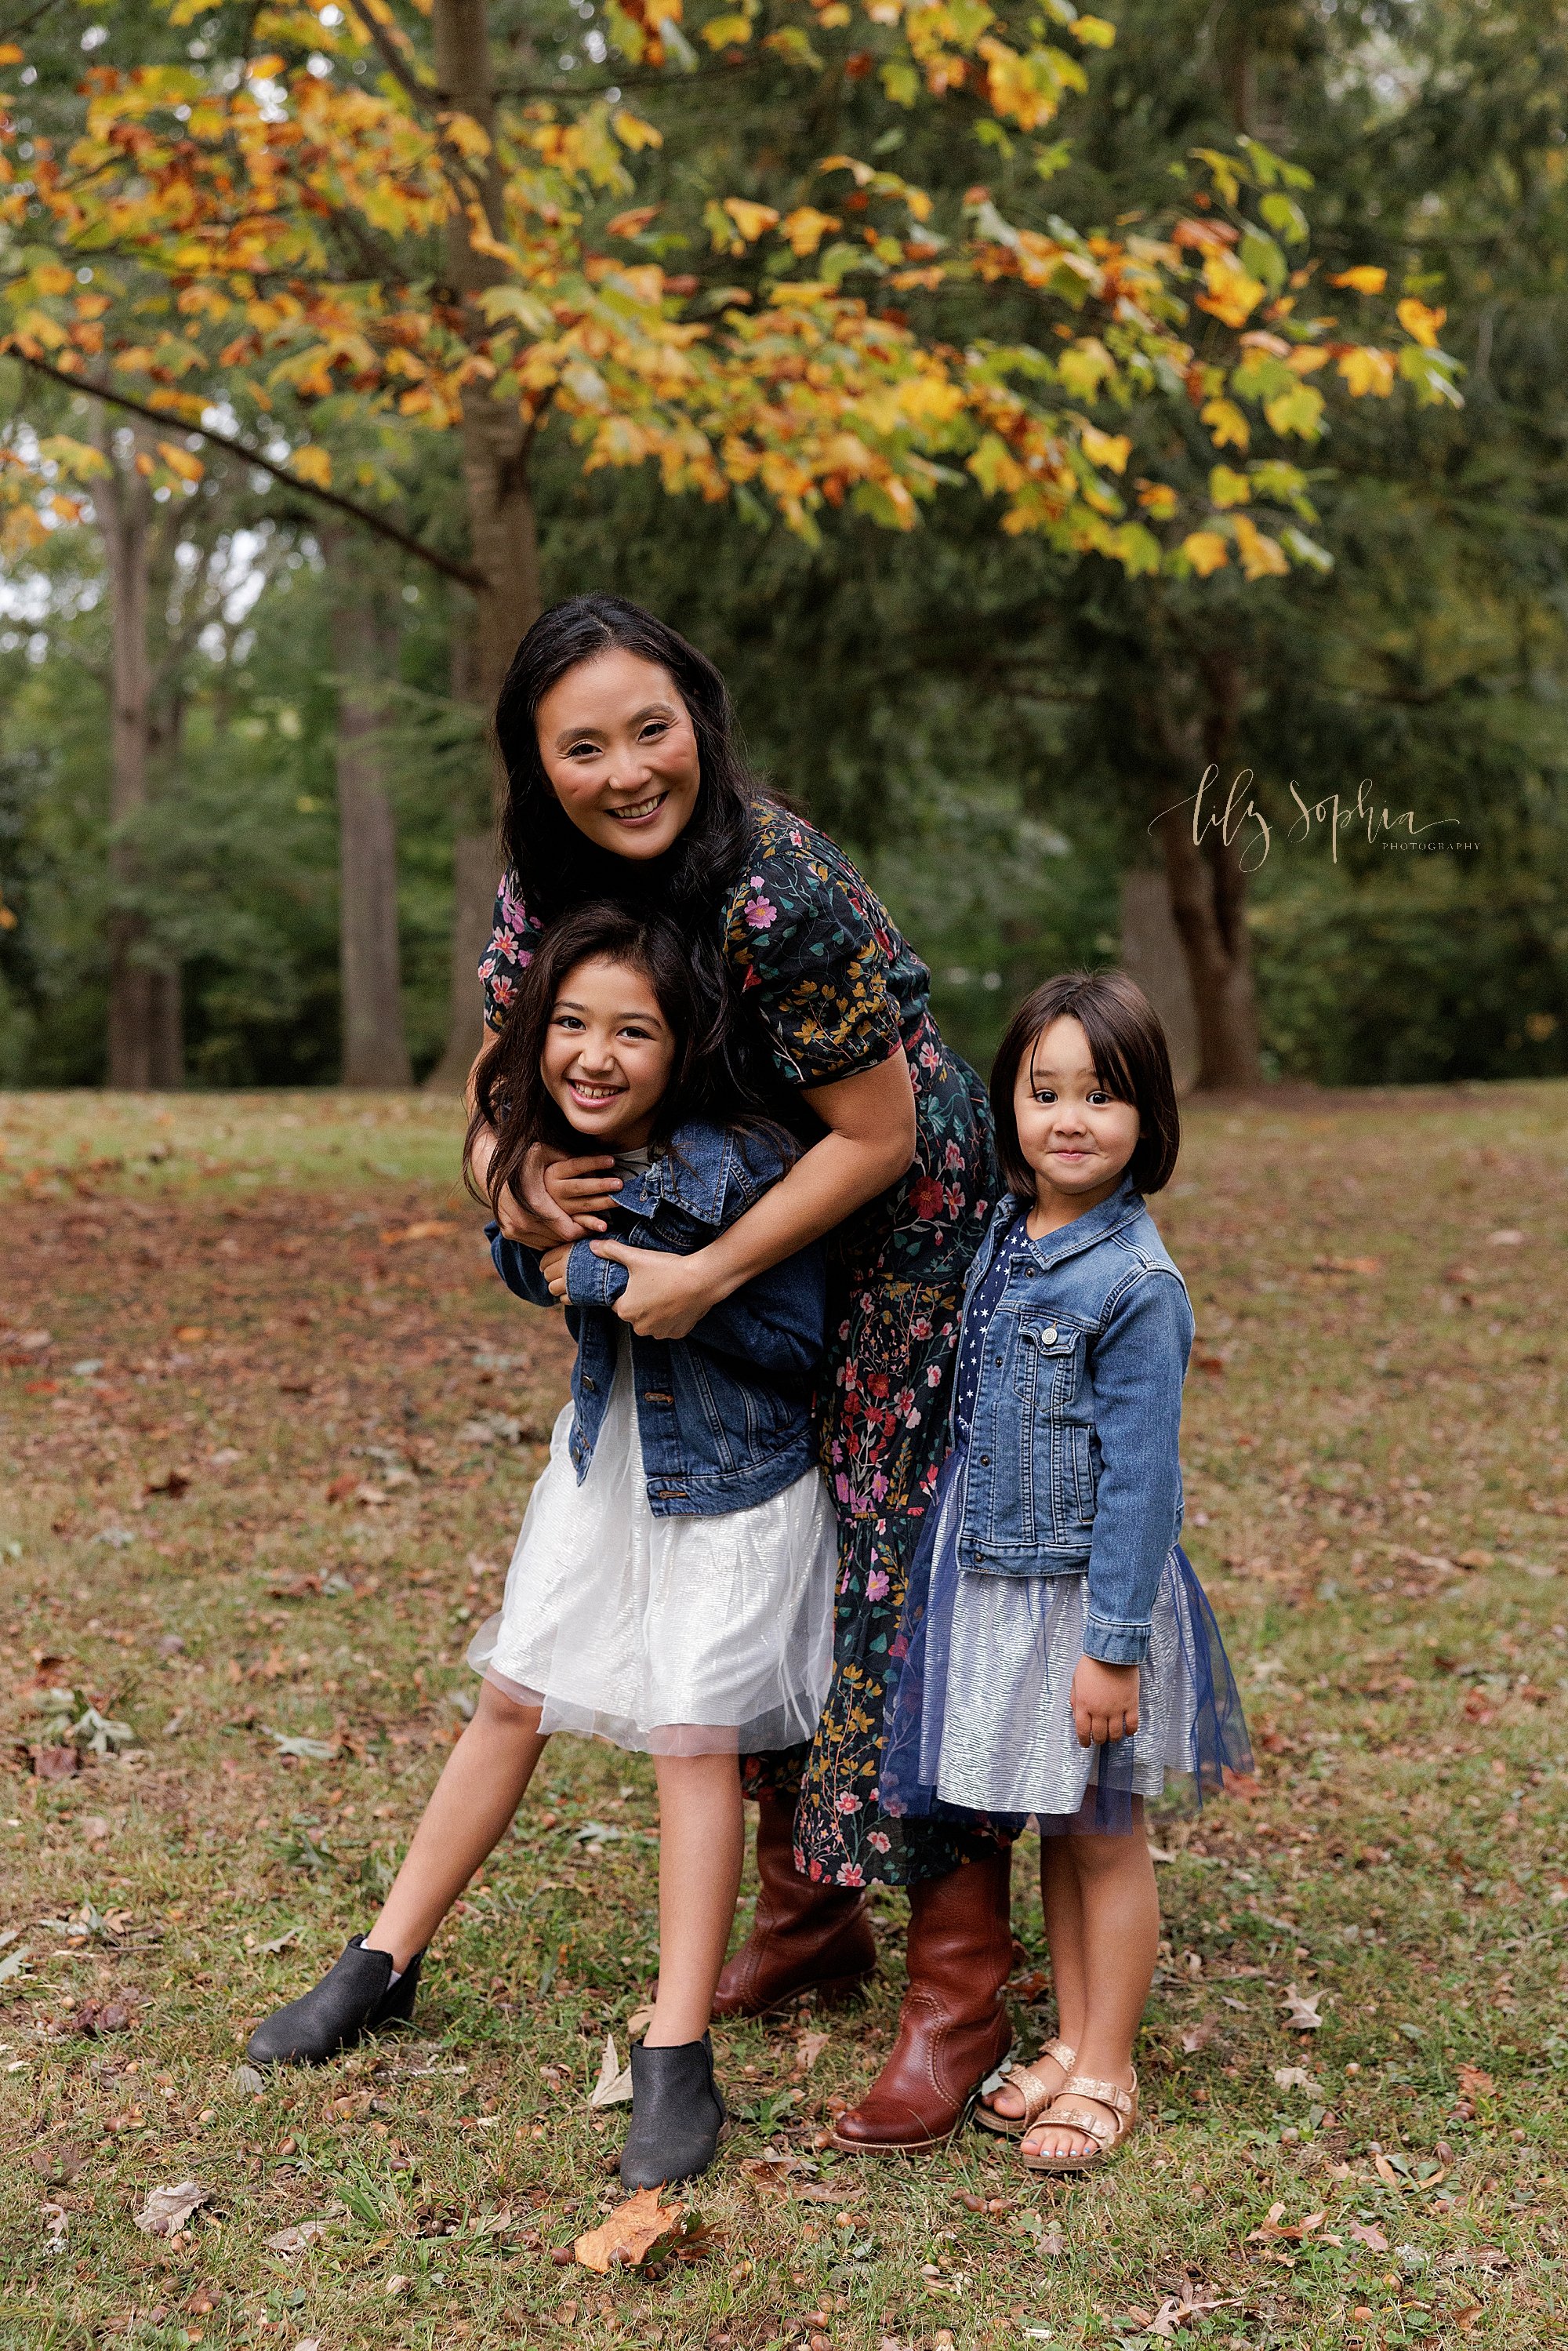  Family photo session with a mother and her two daughters at sunset in an Atlanta park at sunset during autumn. 